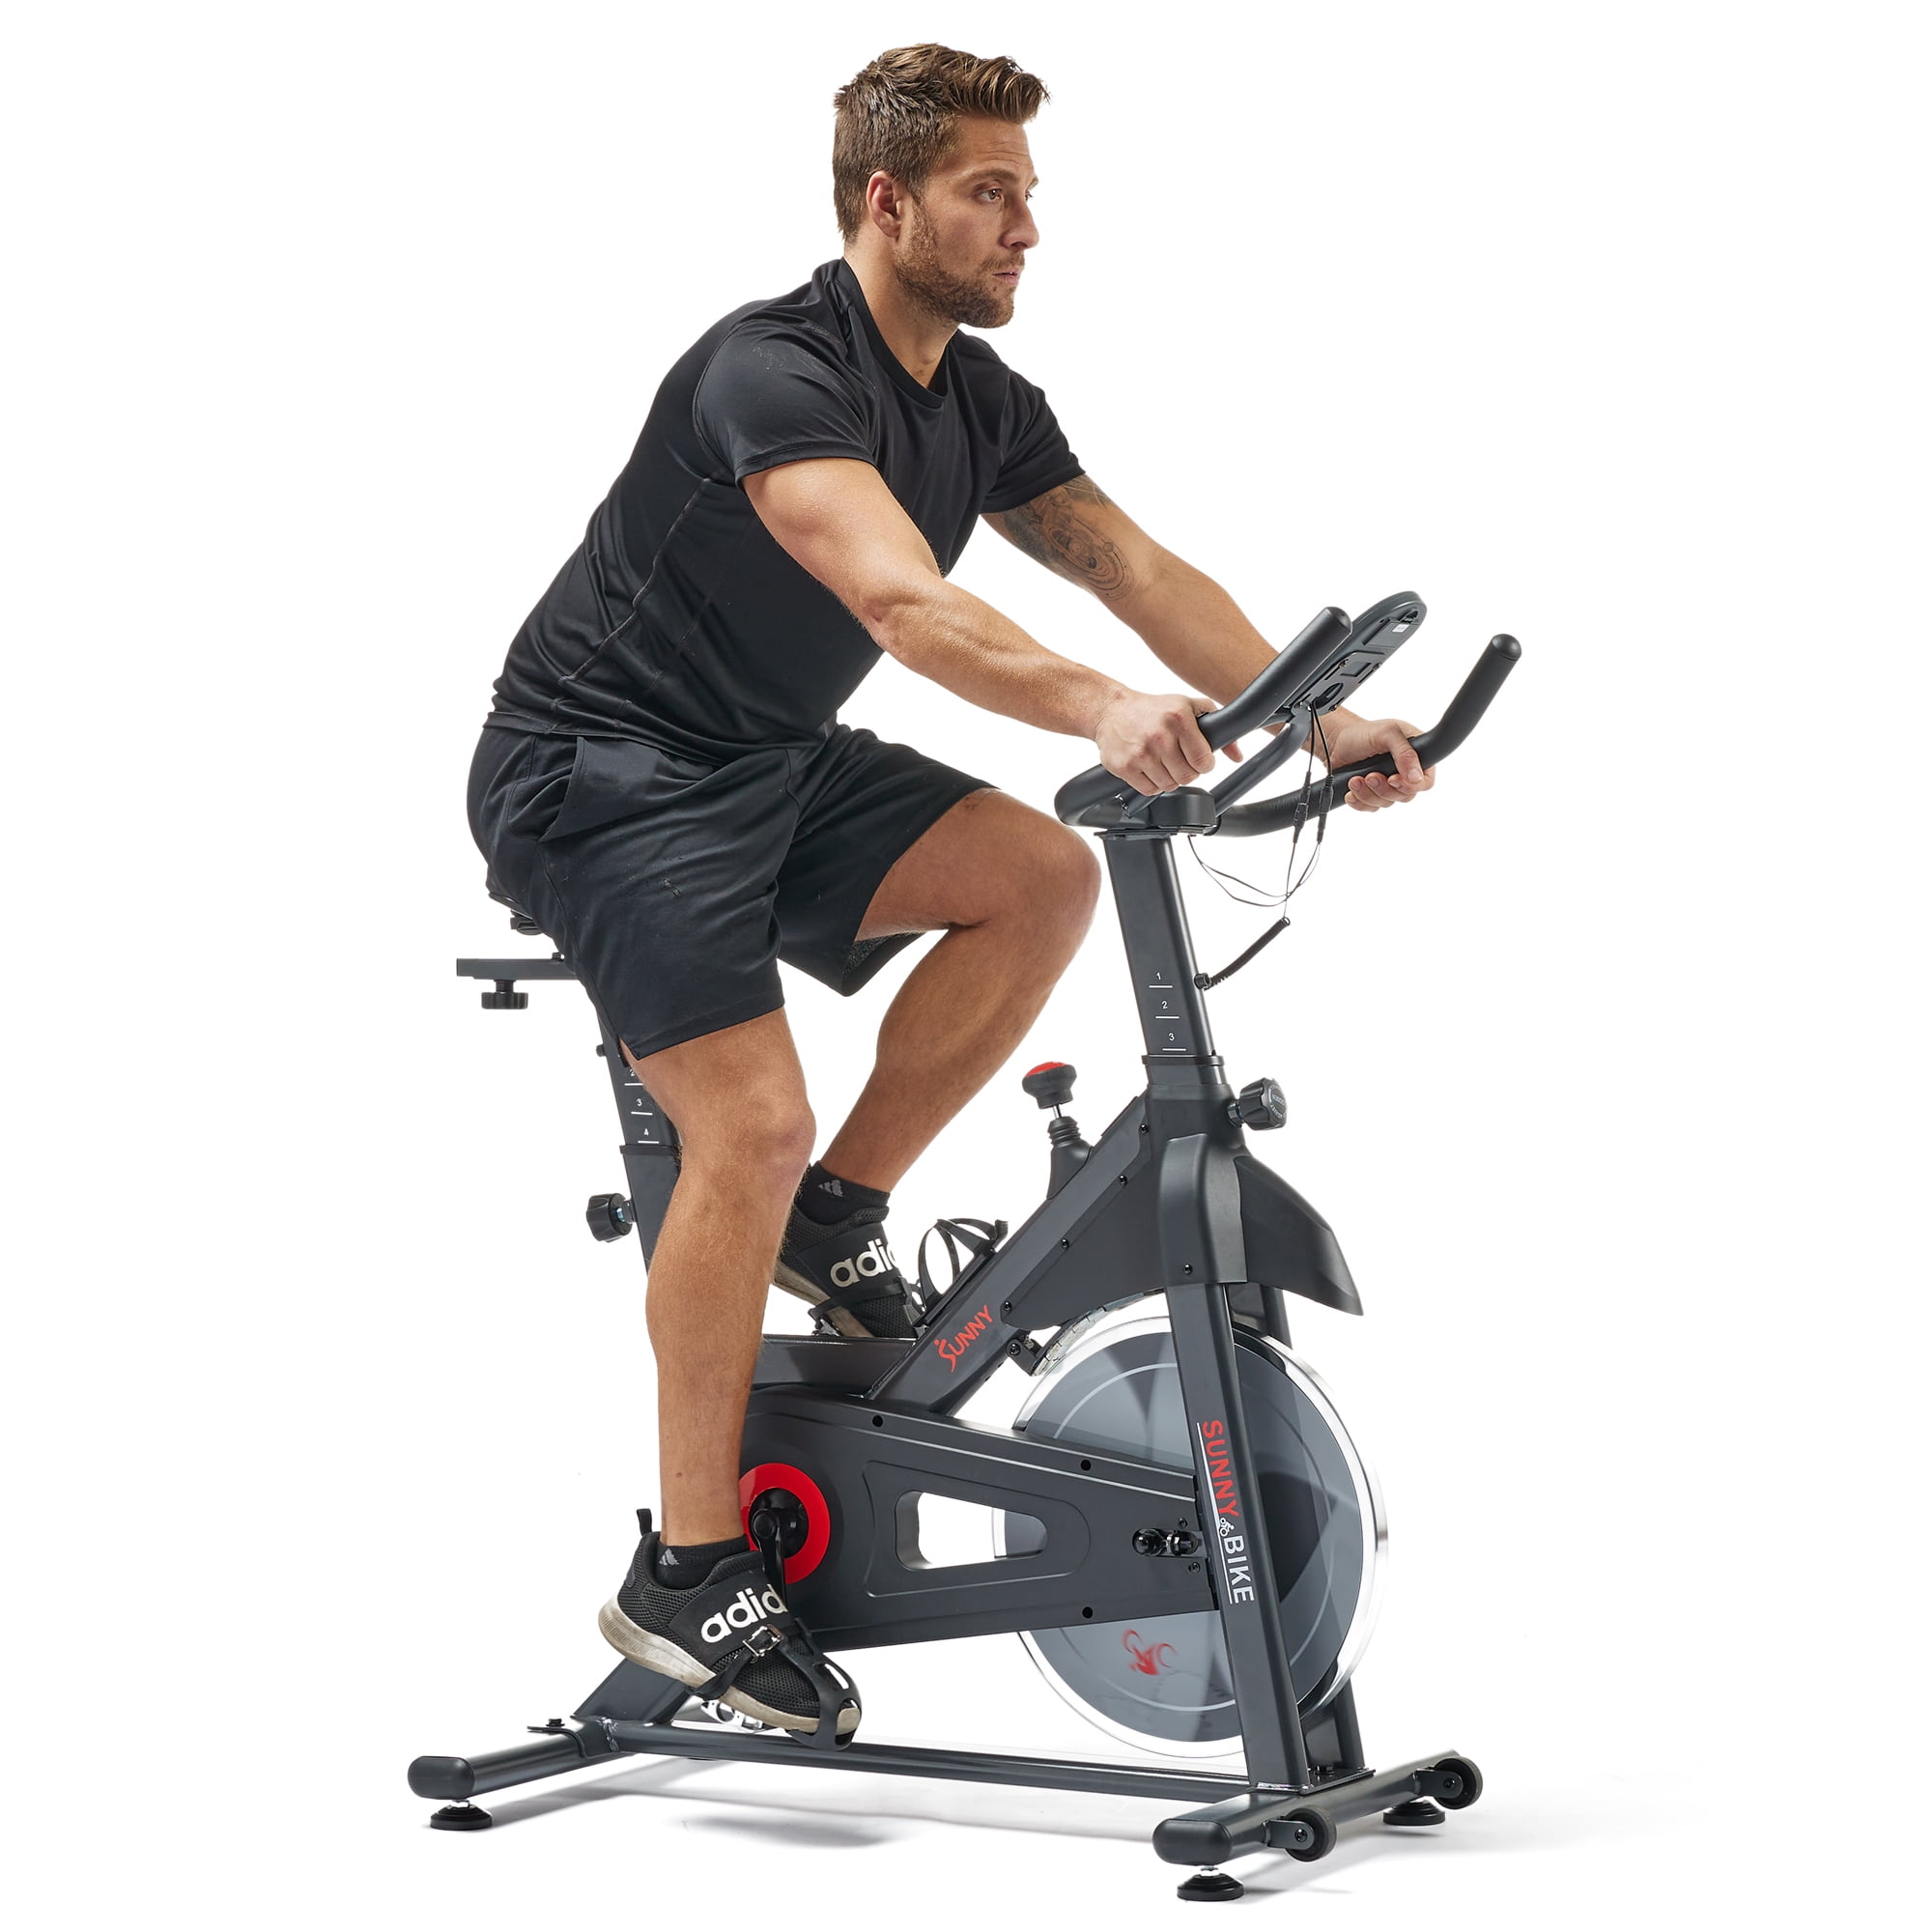 Health & Essential Series Connected Magnetic Exercise (SF-B122055) - Walmart.com